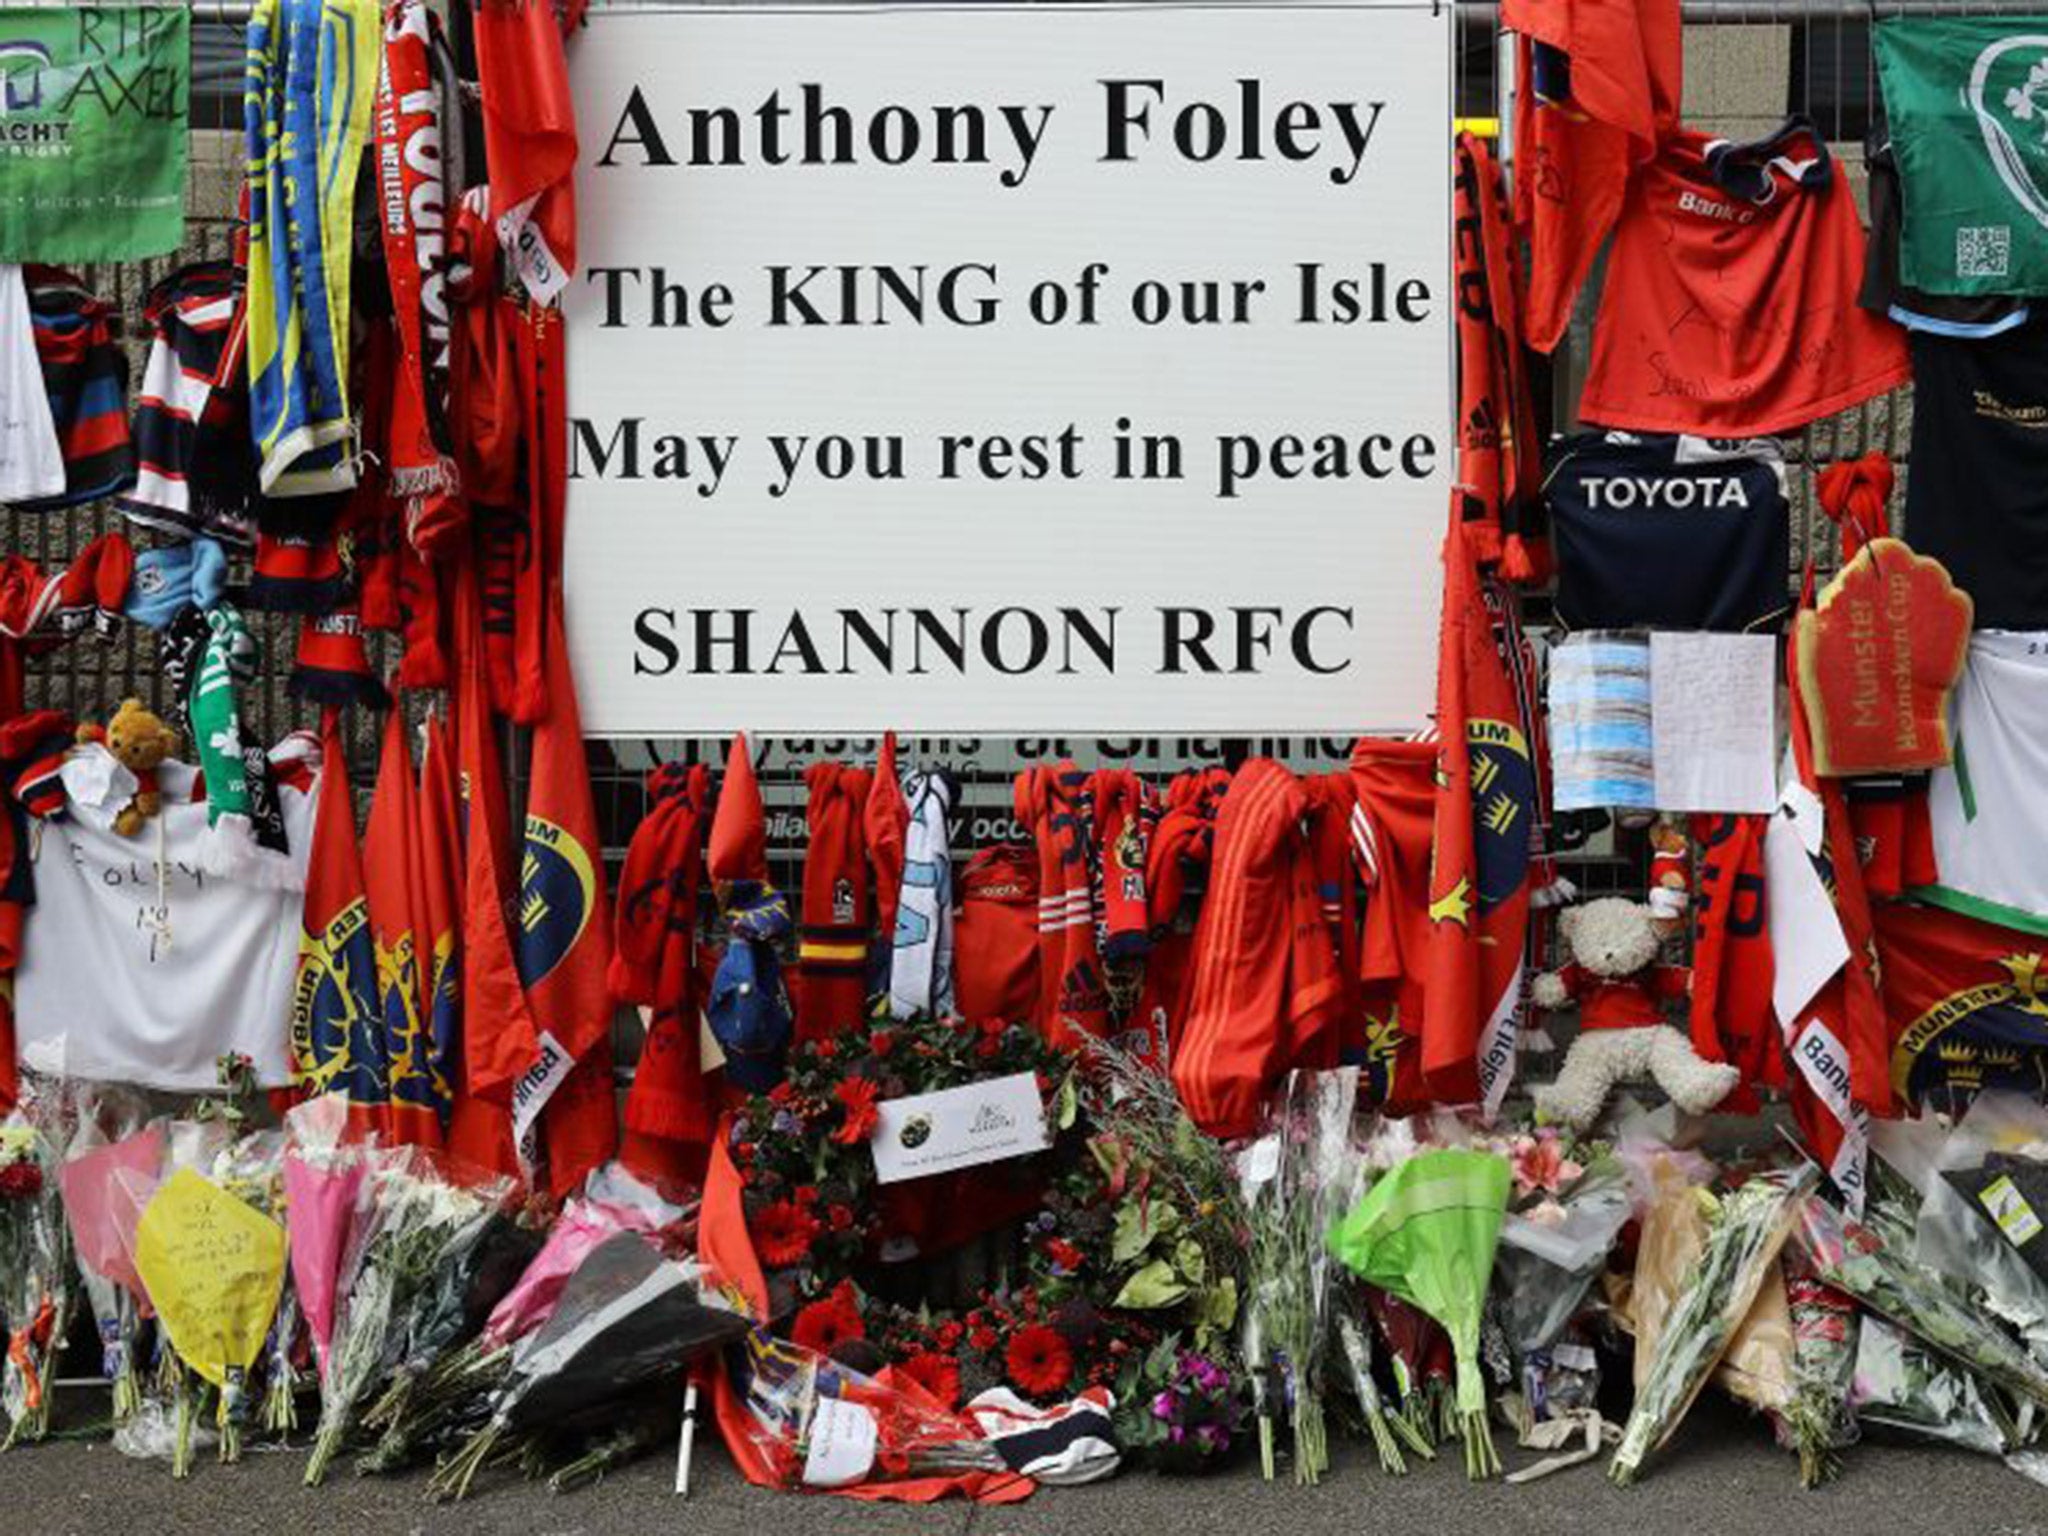 Foley's boyhood club, Shannon RFC, also paid tribute to the former Munster captain